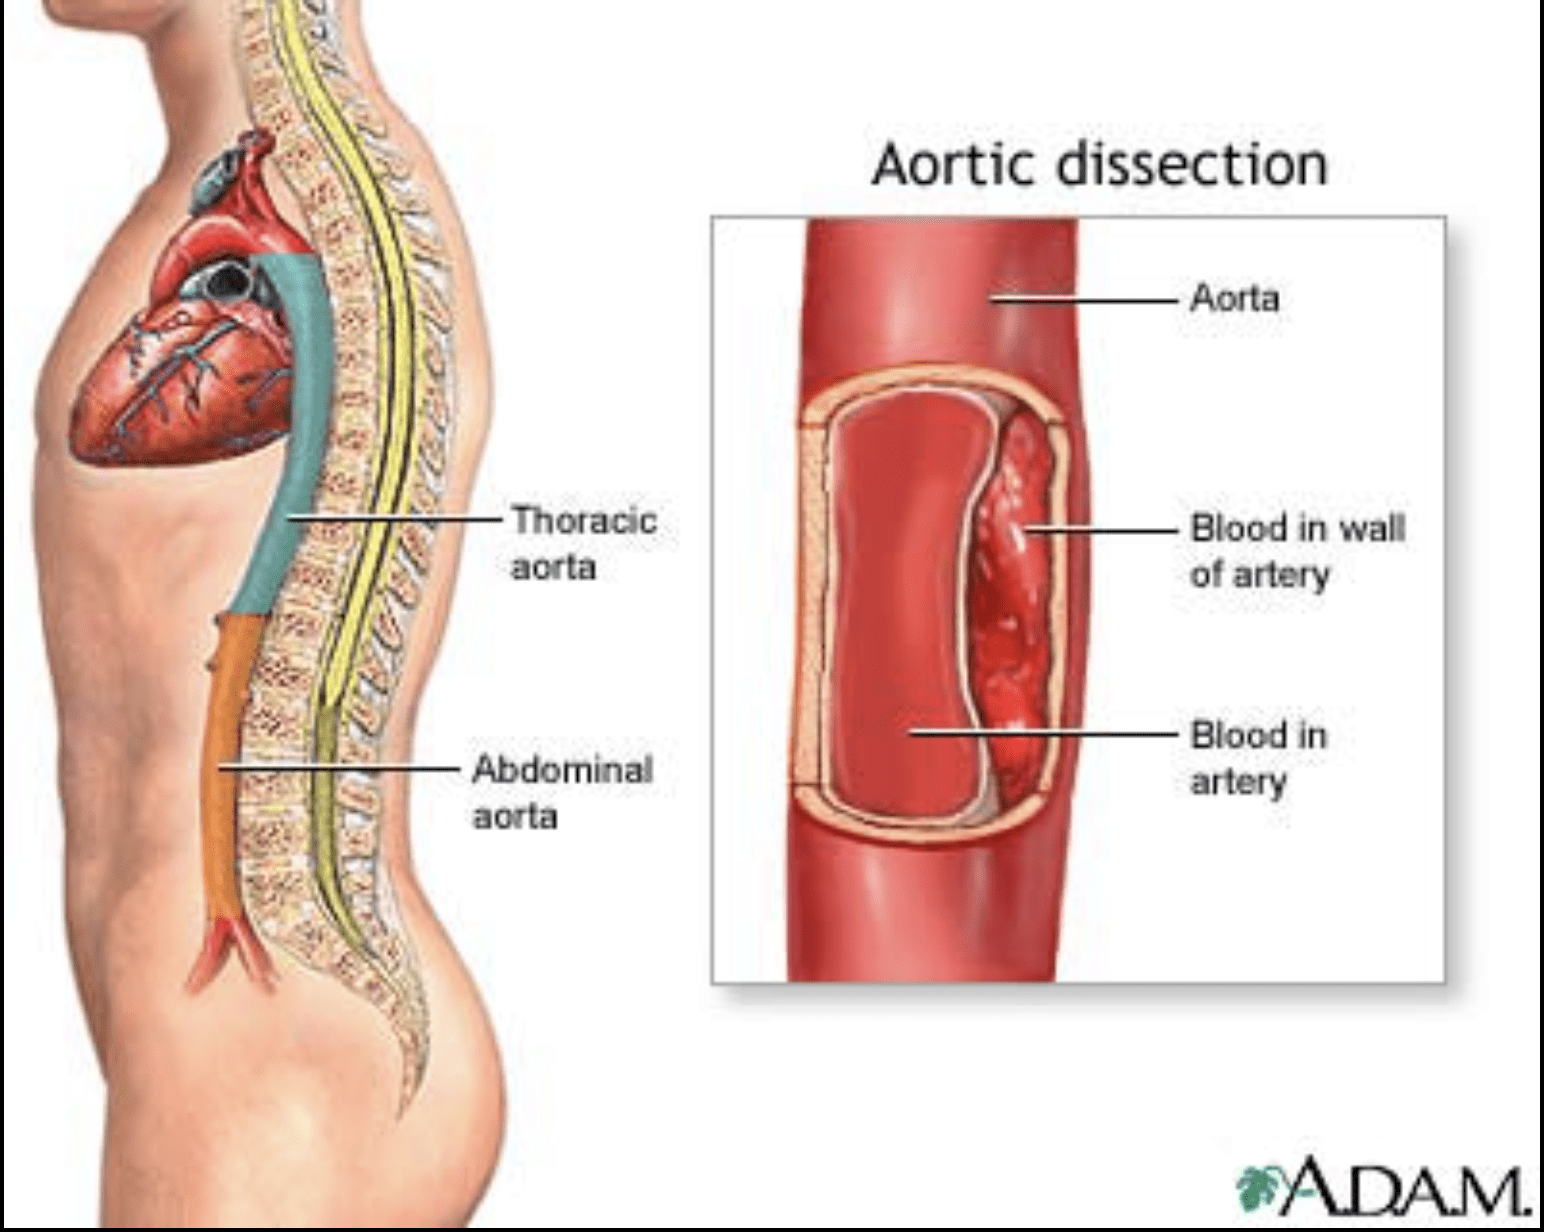 aortic dissection